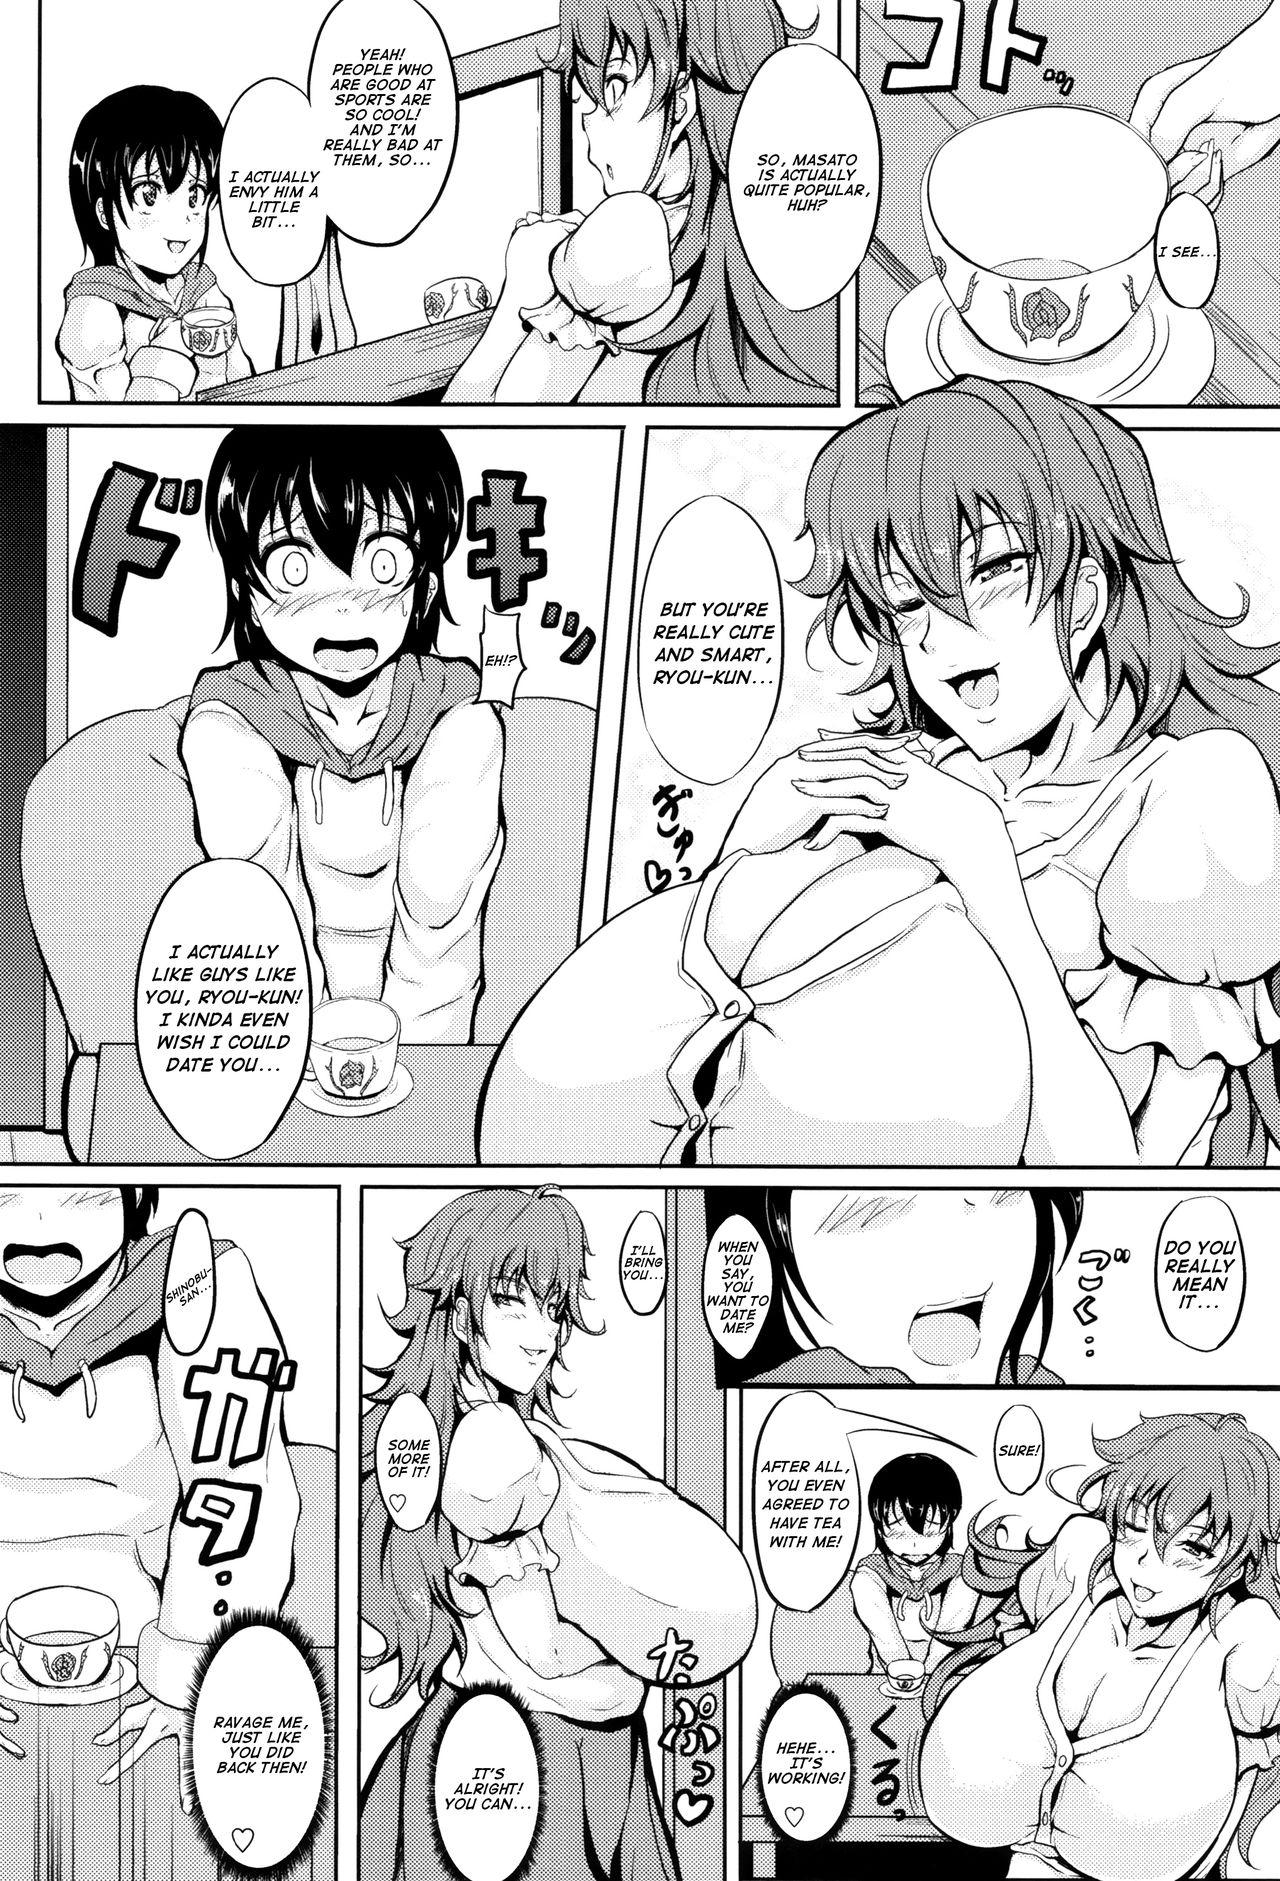 Punished Ikenai Tomohaha | Dirty Mother of a Friend Web - Page 6